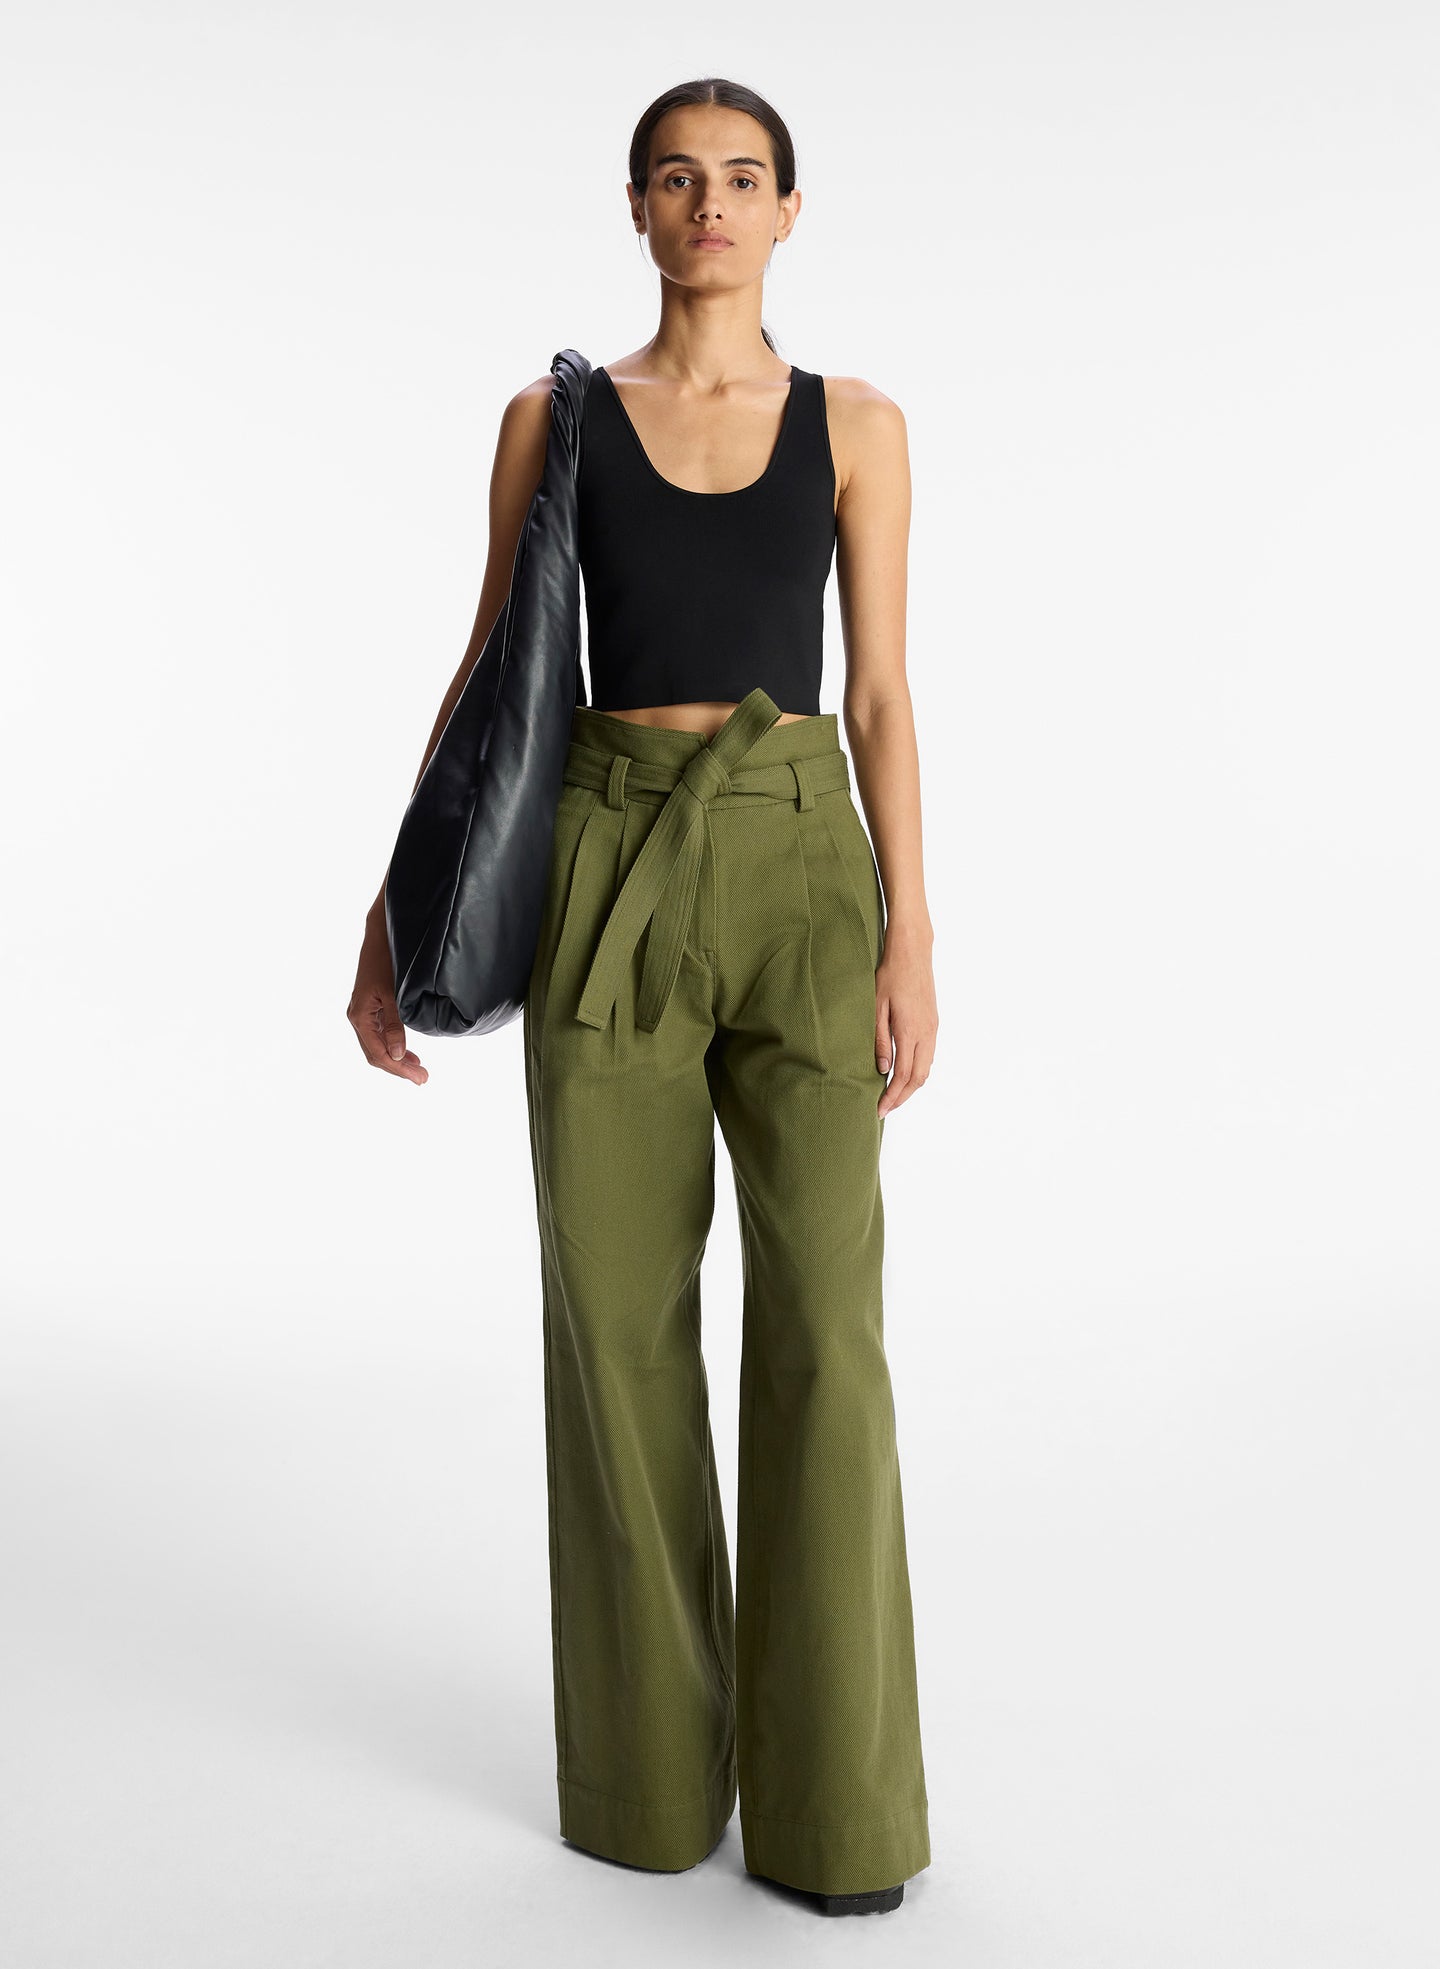 front view of woman wearing black tank top and olive green wide leg pants